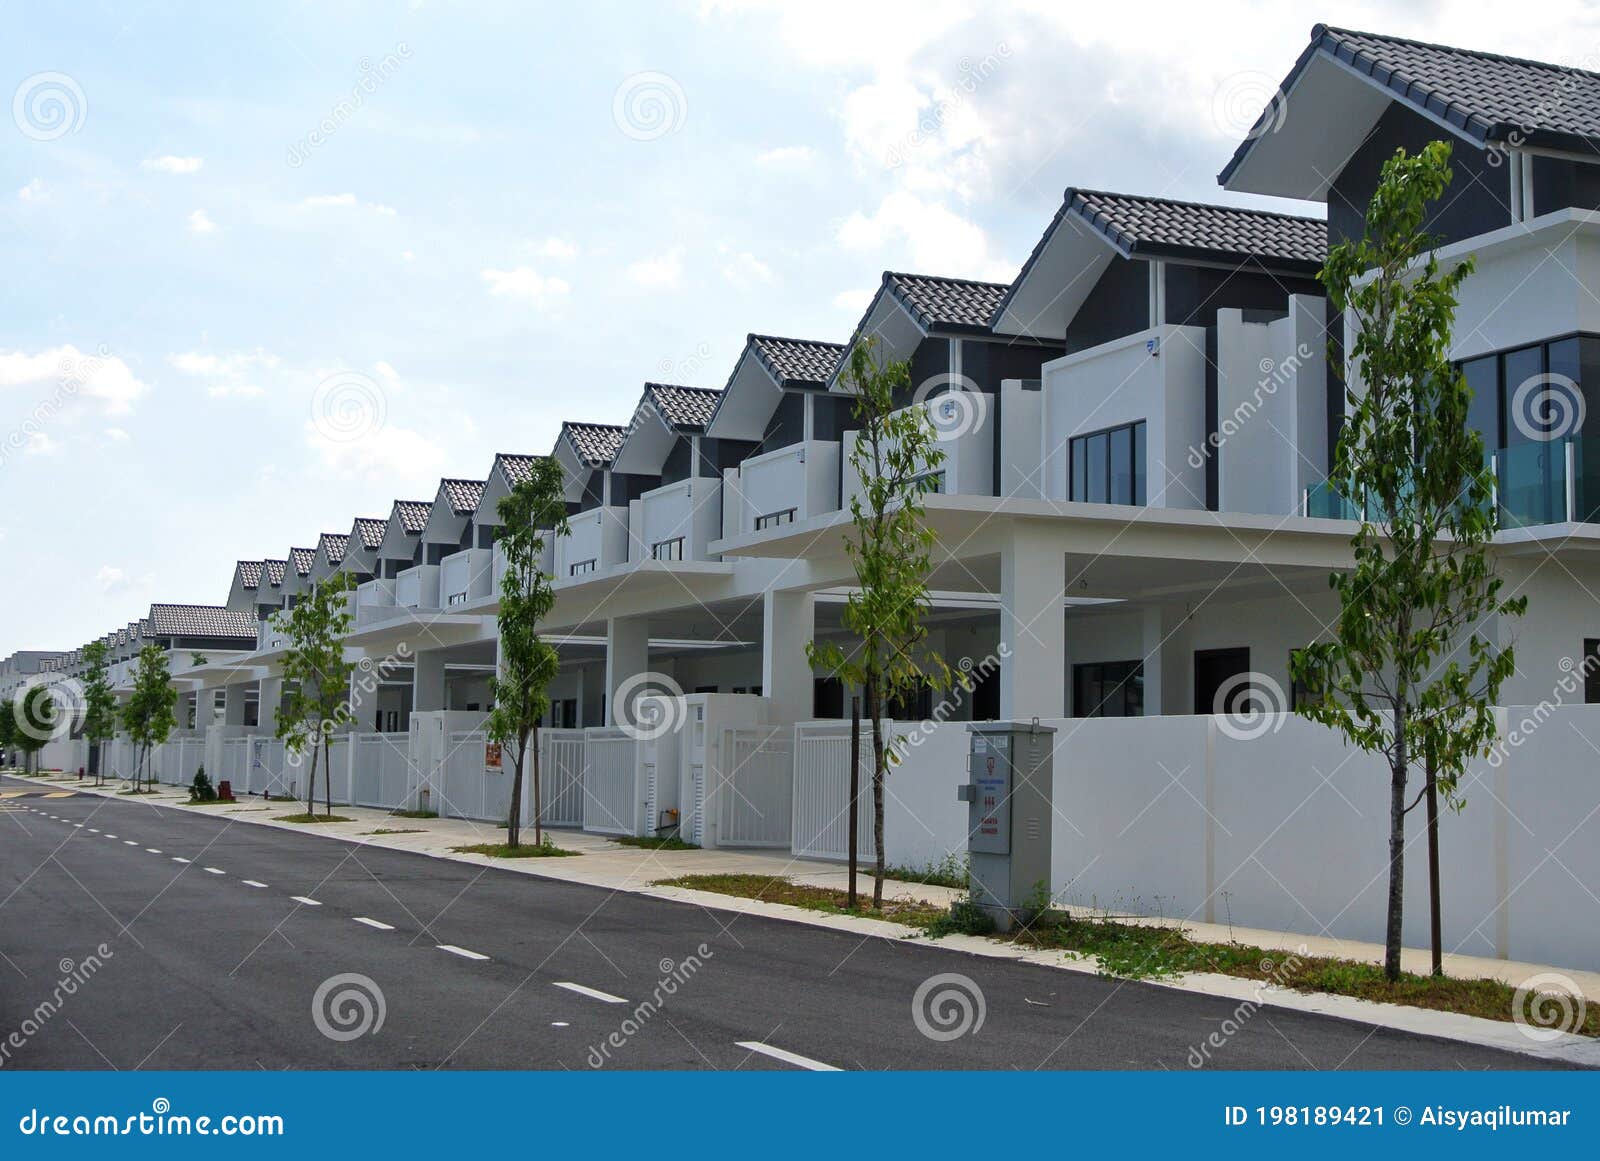 New Double Story Luxury Terrace House In Malaysia Editorial Photo Image Of Home Design 198189421